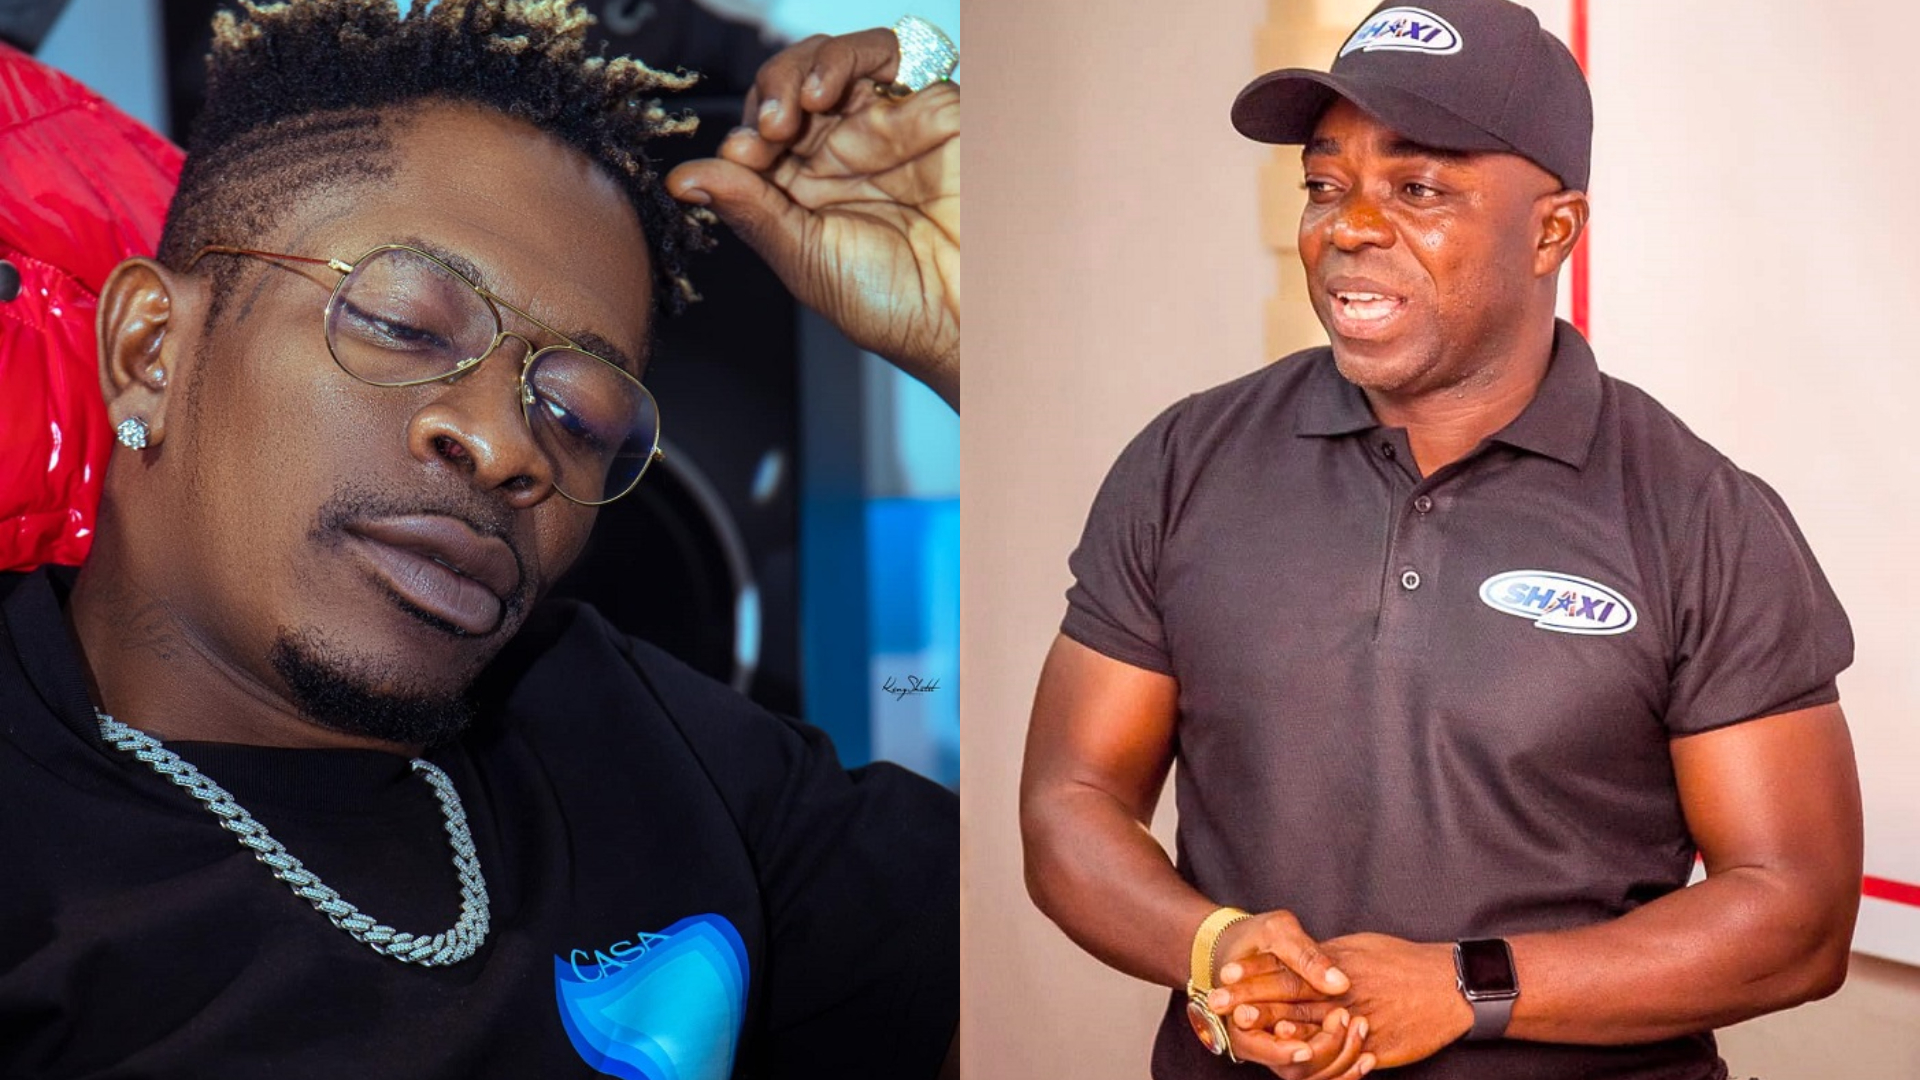 I do not have a contract agreement with Shatta Wale — Sammy Flex